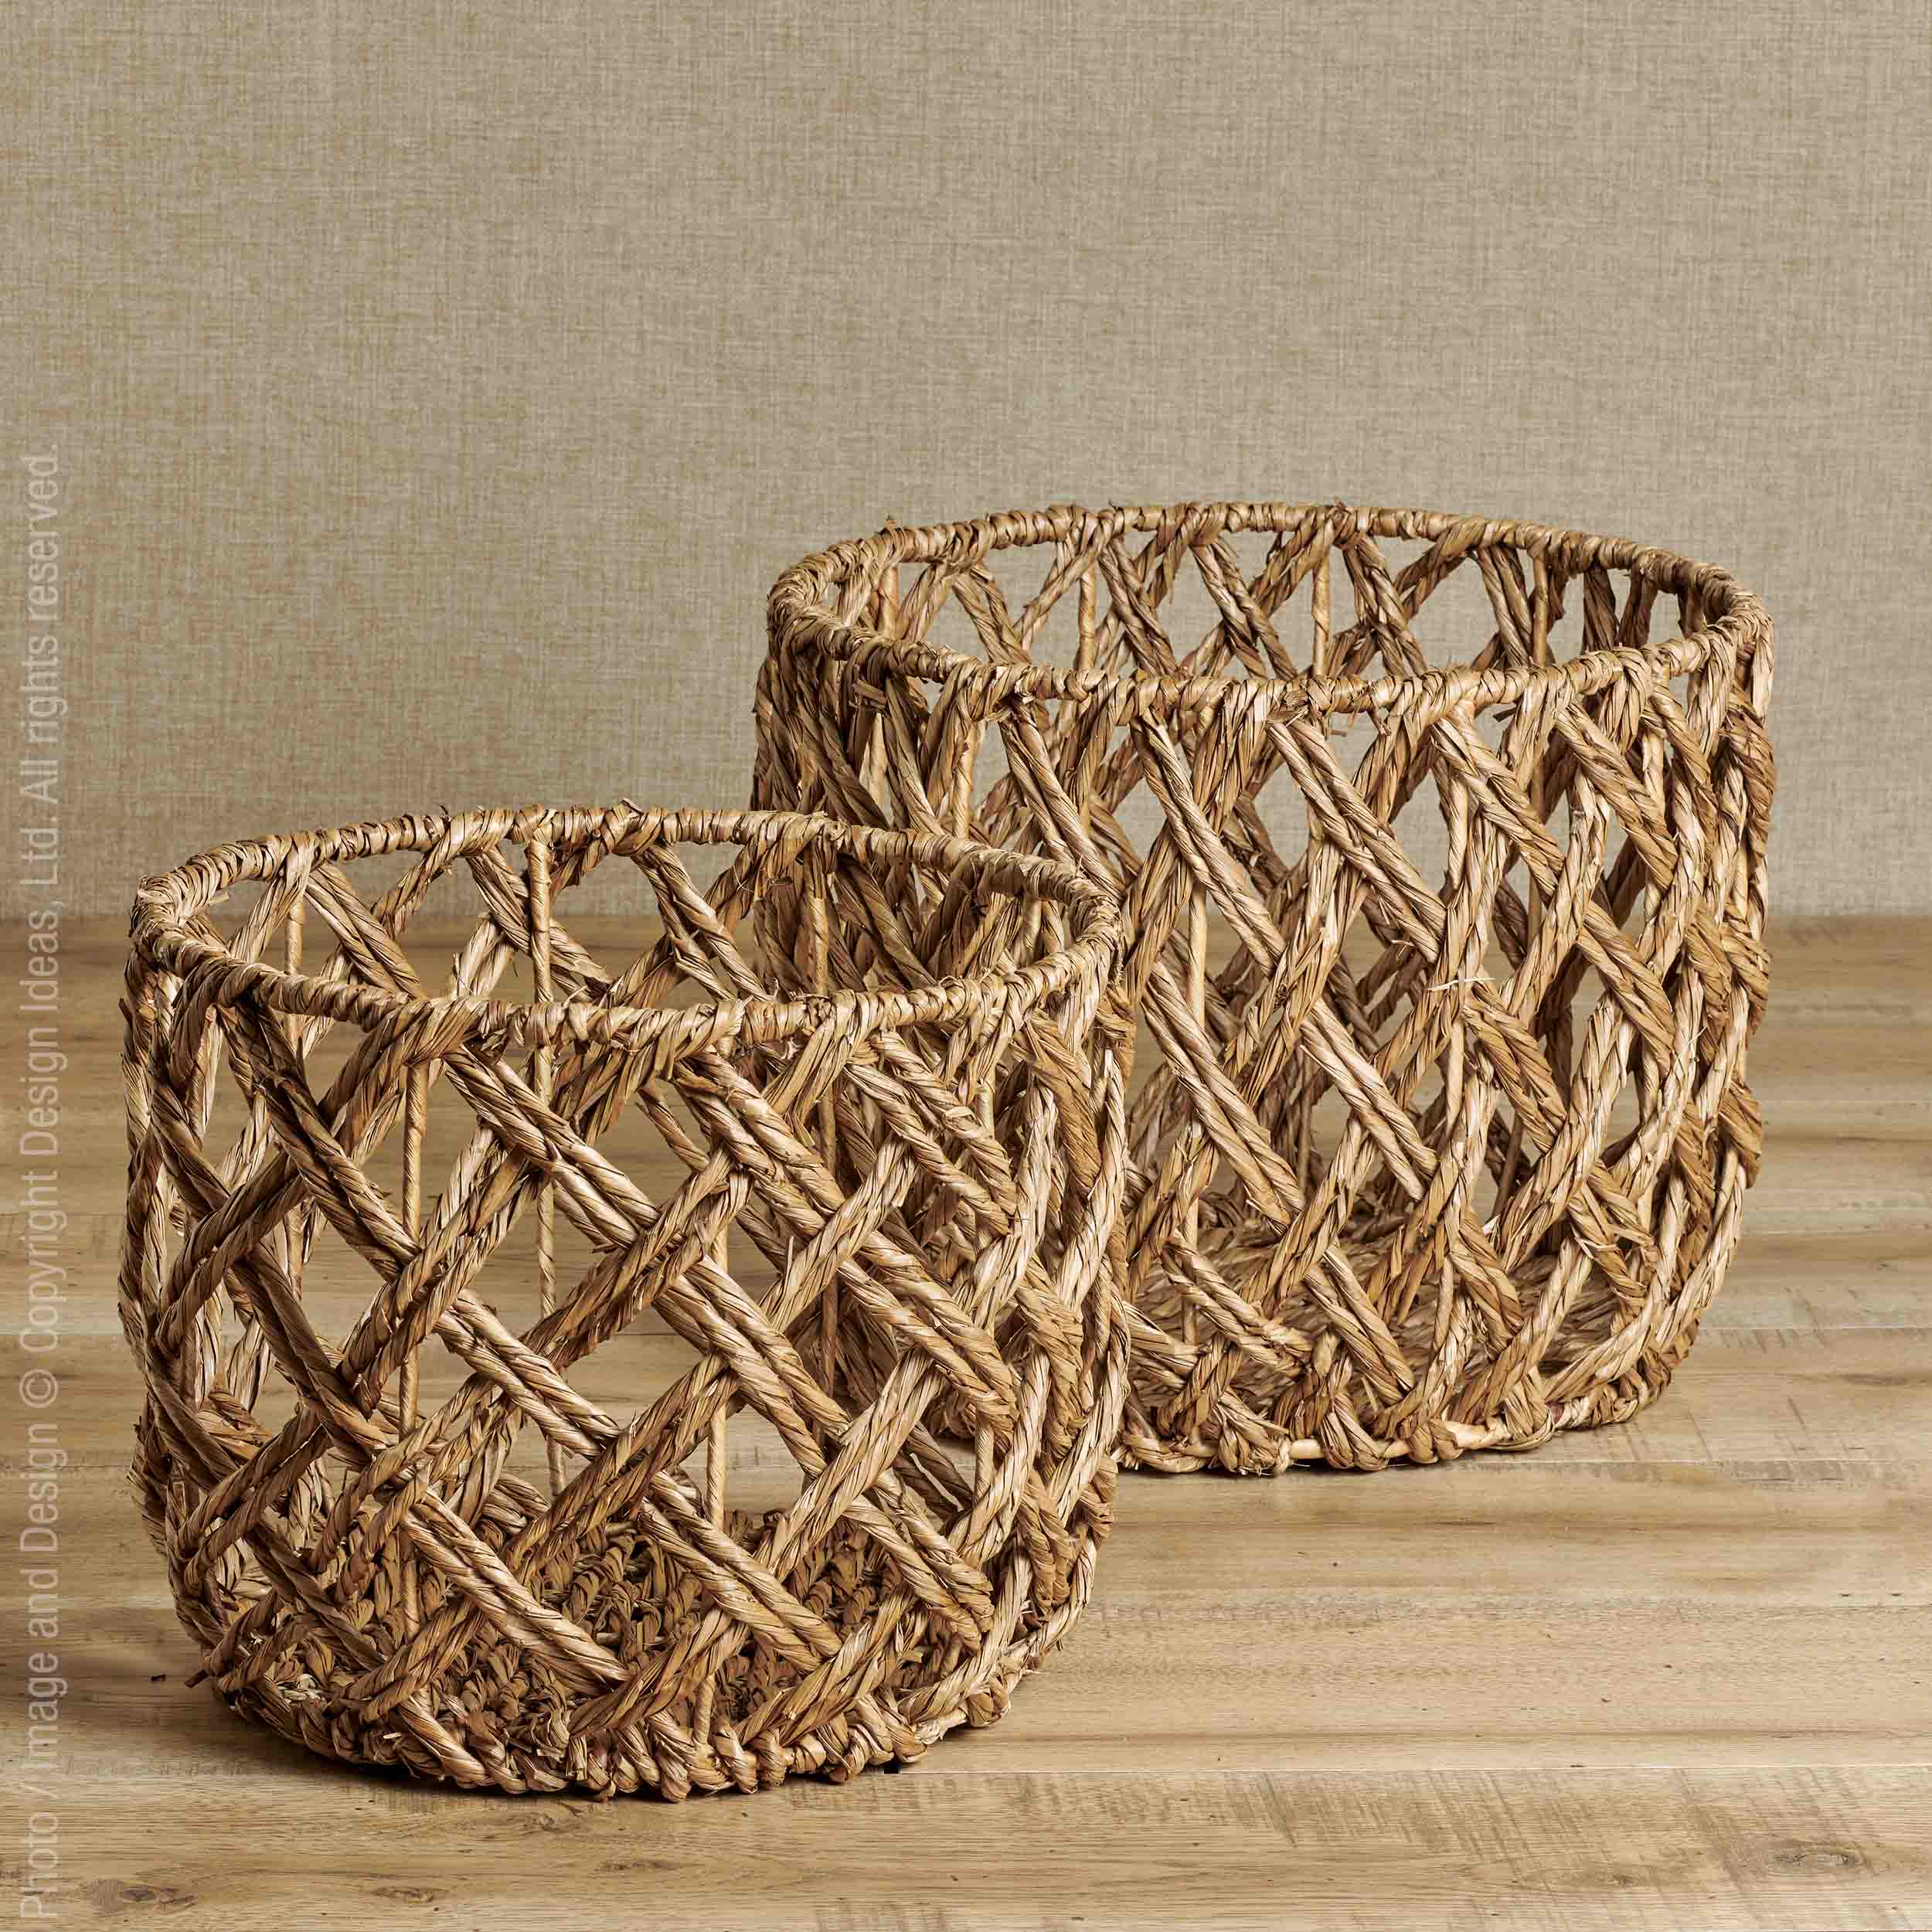 Vasate™ baskets - Natural | Image 1 | Premium Basket from the Vasate collection | made with Water Hyacinth Twine for long lasting use | texxture